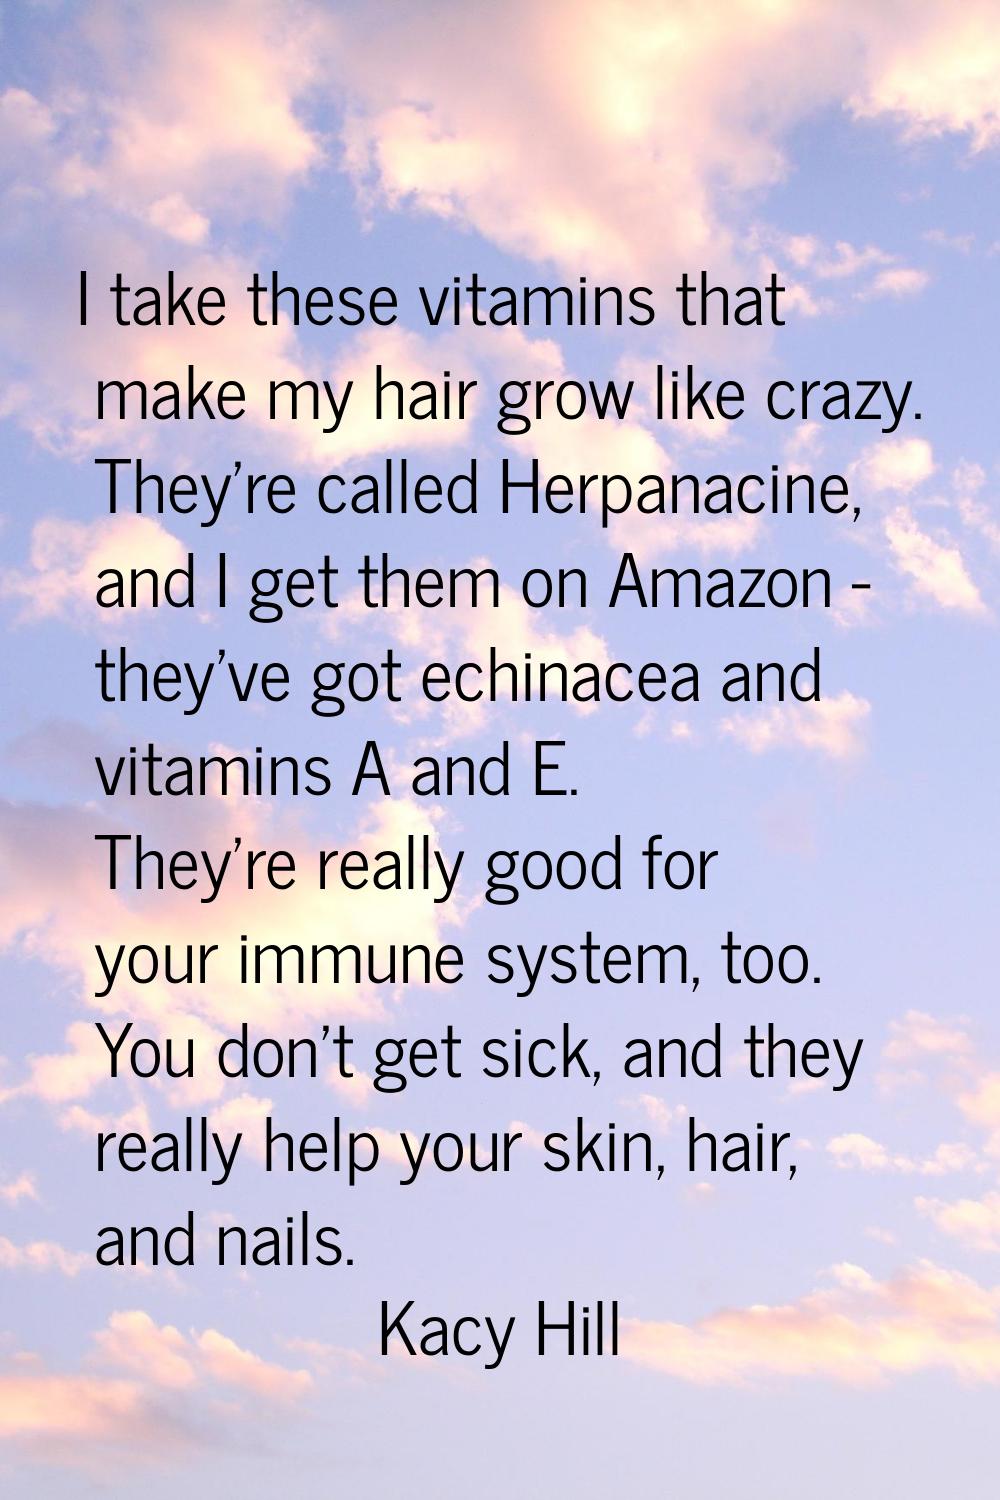 I take these vitamins that make my hair grow like crazy. They're called Herpanacine, and I get them